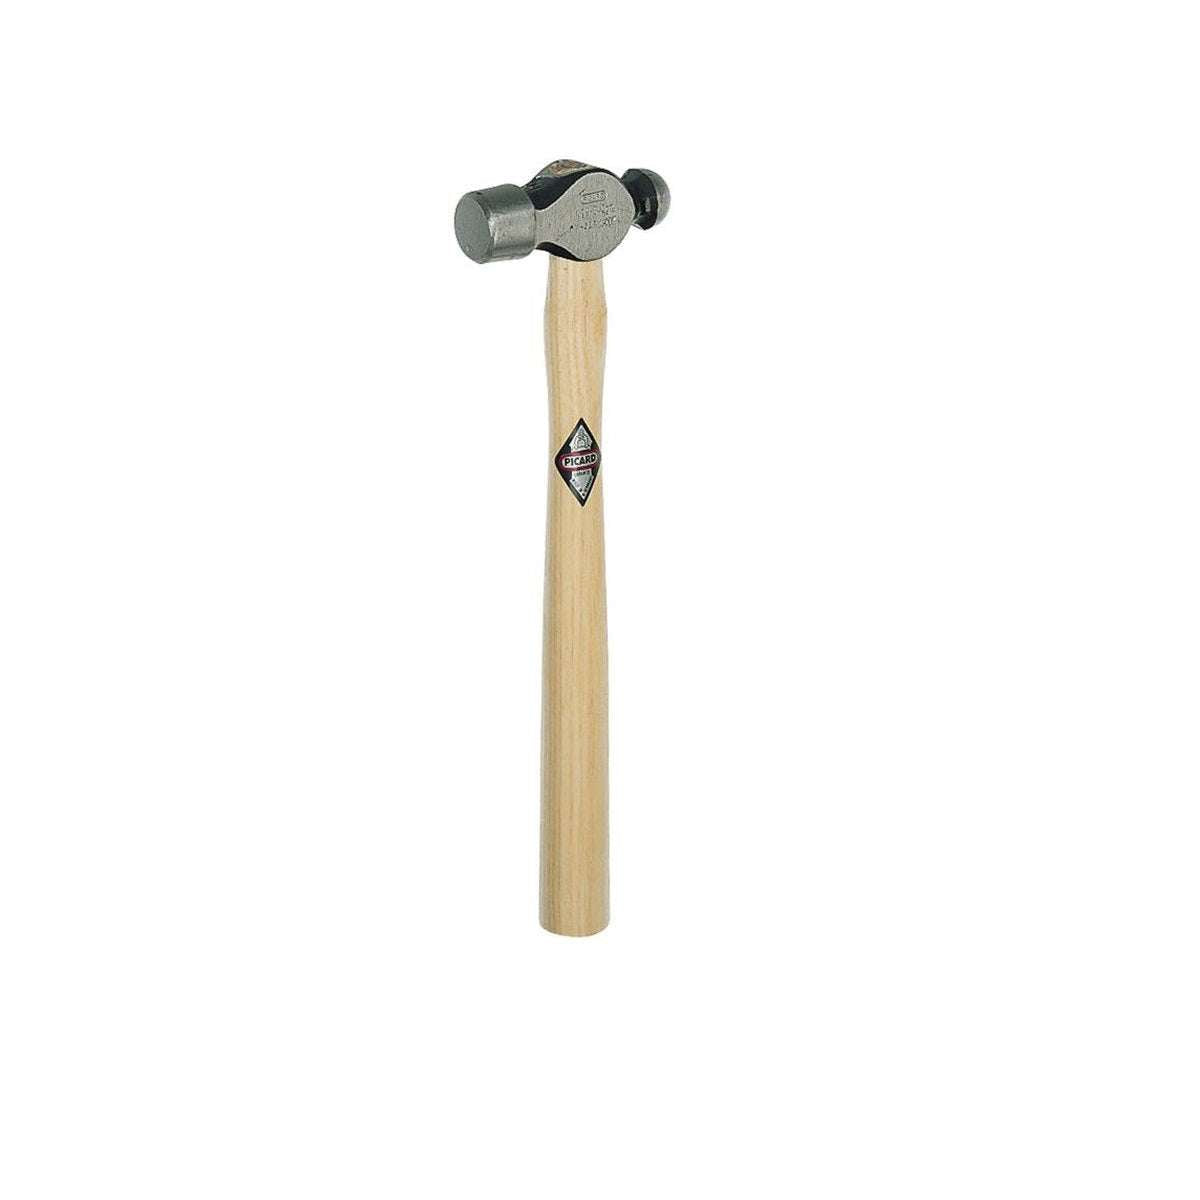 Ball peen hammer for boilermakers and tinsmiths 900g grey - Picard